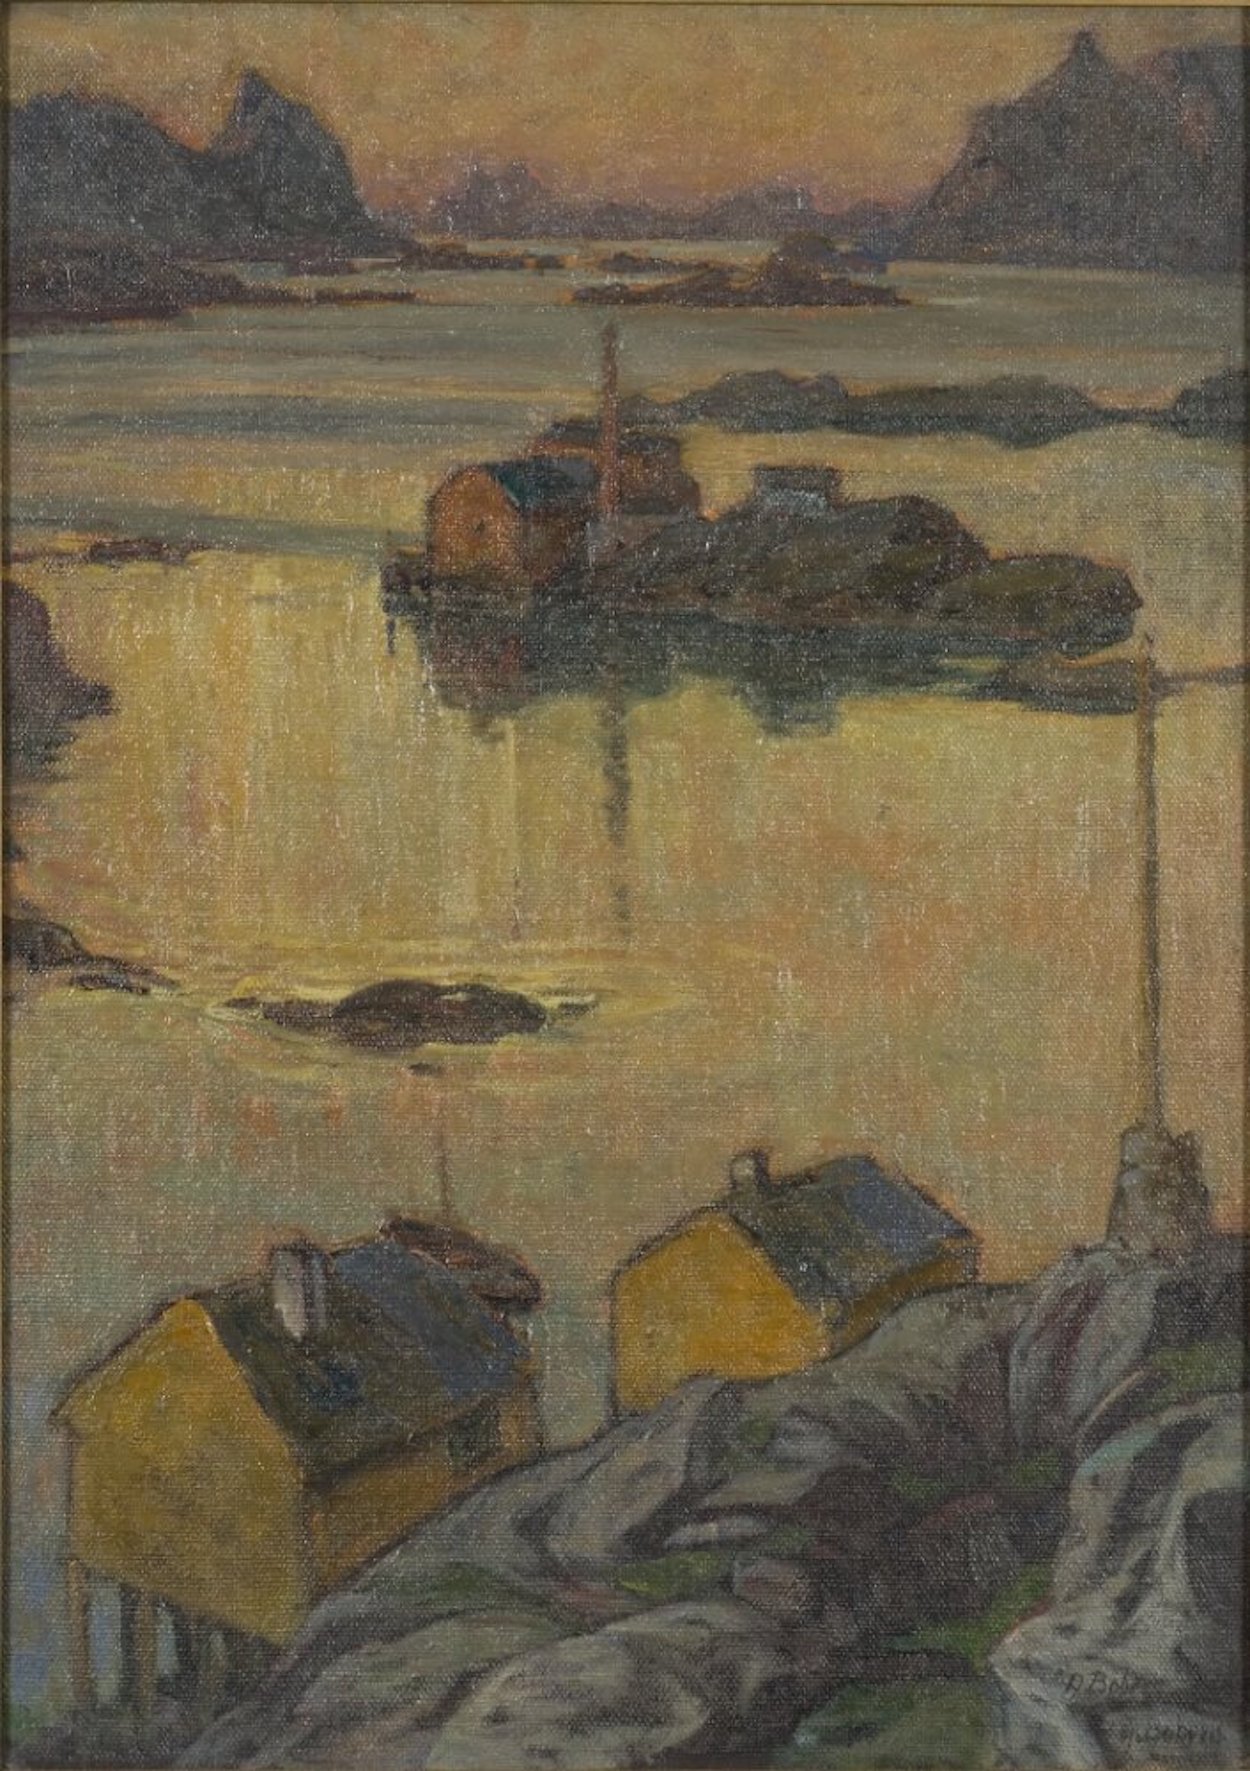 An August Night. Study from North Norway by Anna Boberg - 1900s - 63 x 45 cm Nationalmuseum